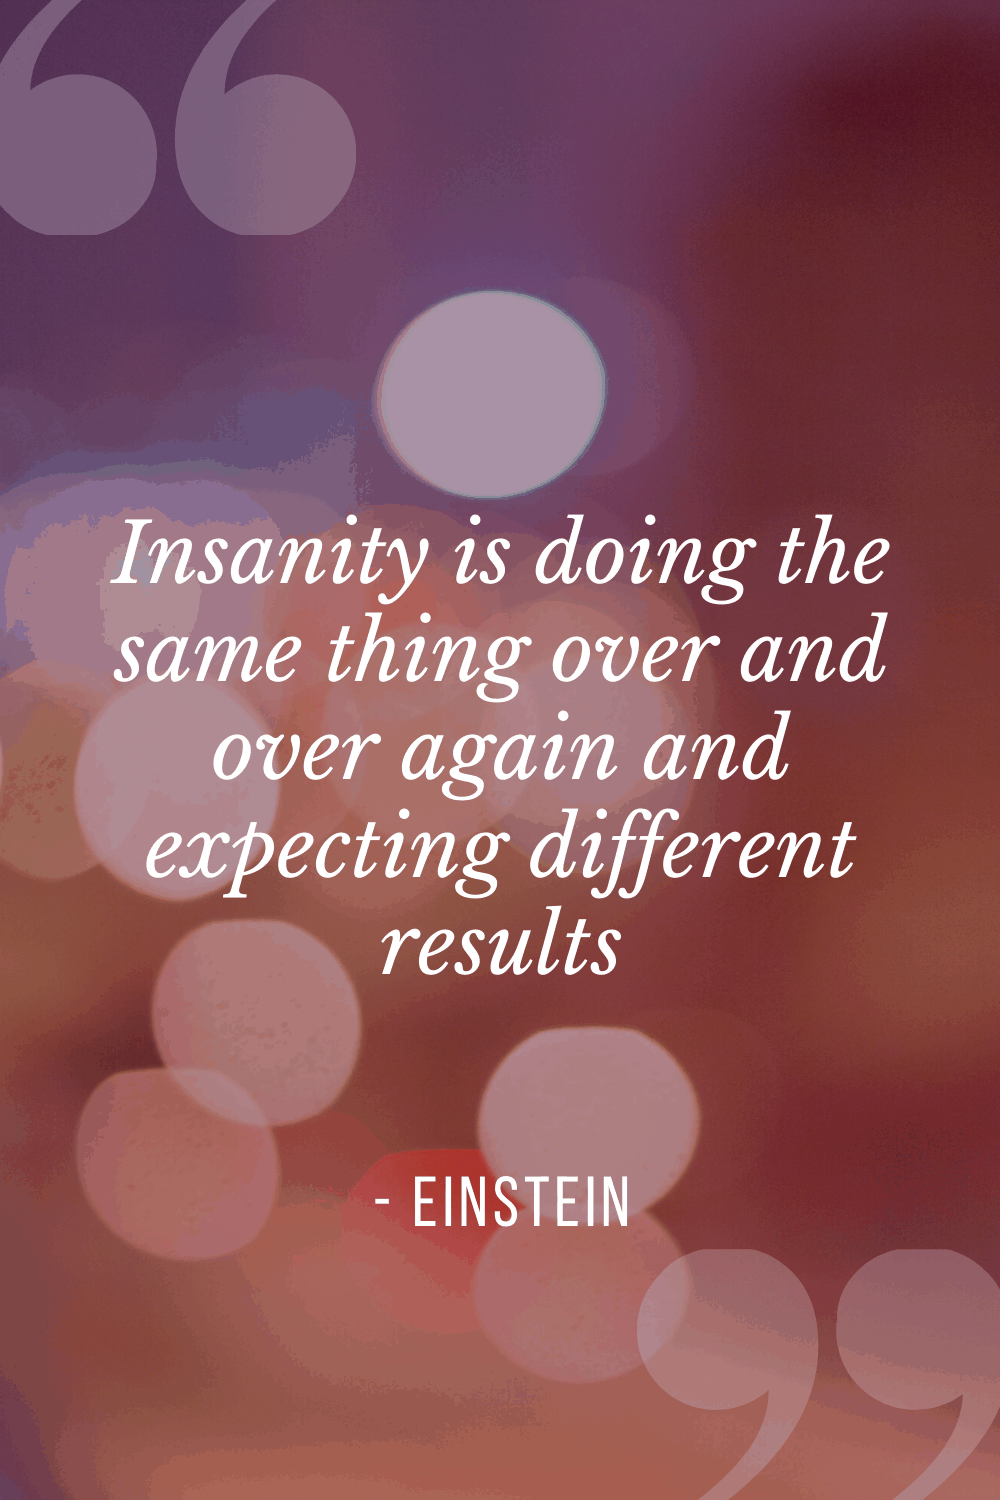 Insanity is doing the same thing over and over again and expecting different results, Albert Einstein